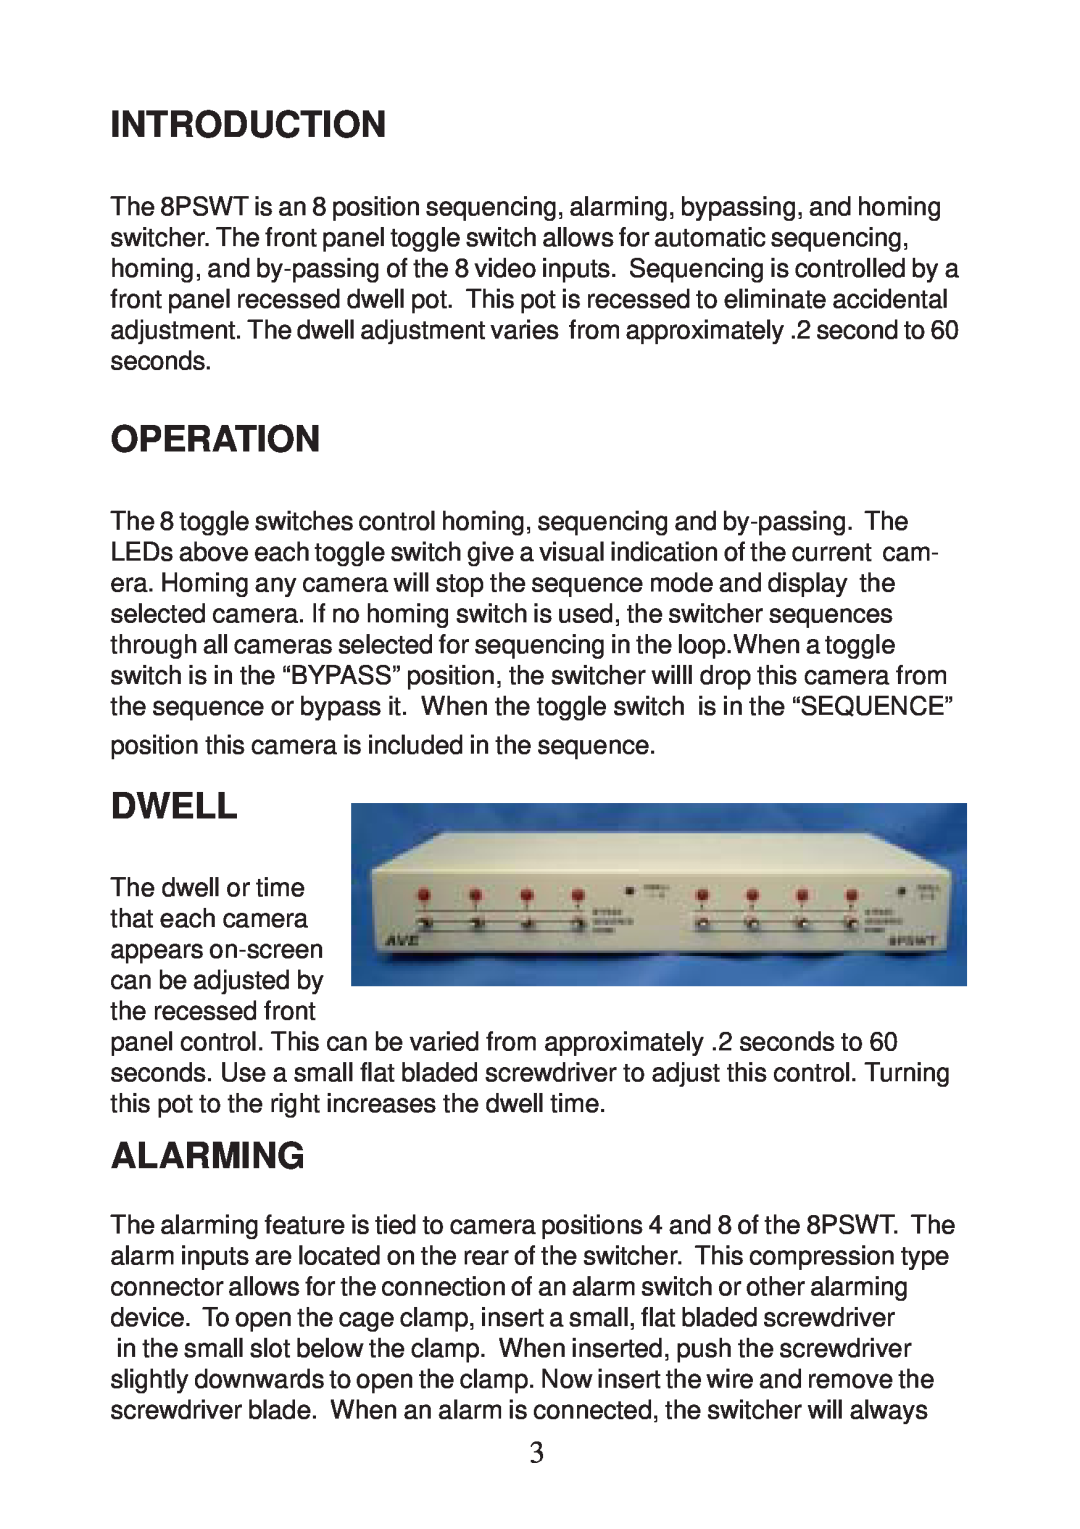 AVE 8PSWT operation manual Introduction, Operation, Dwell, Alarming 